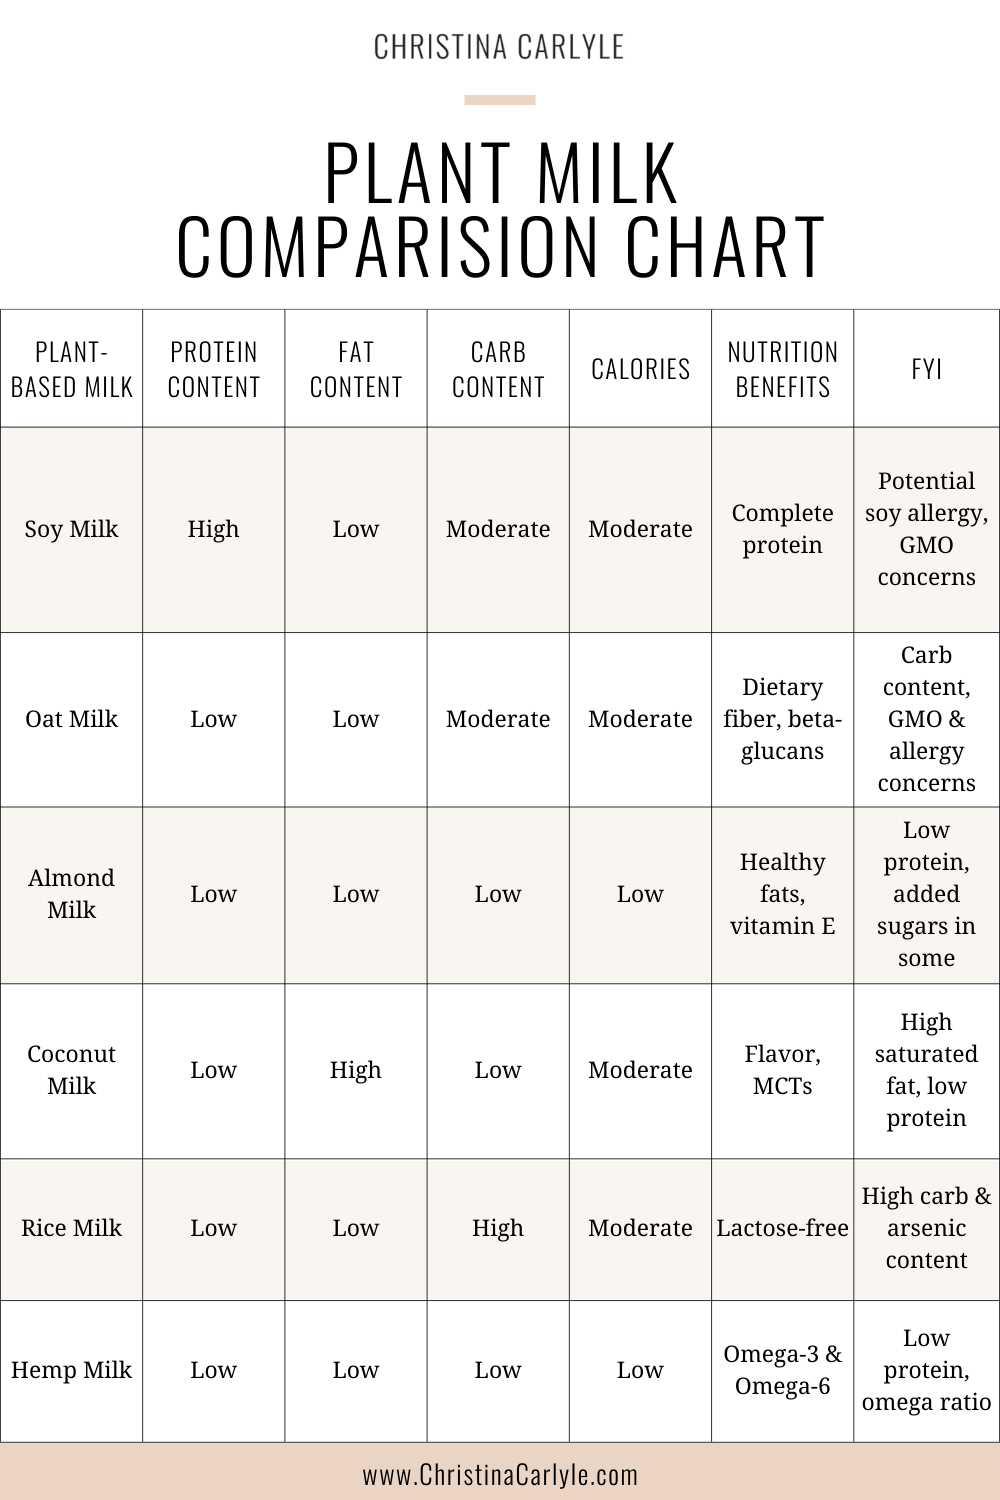 a chart comparing the protein, fat, carbs, calories, nutritional benefits, and risk factors of soy, oat, almond, coconut, rice, and hemp milks.